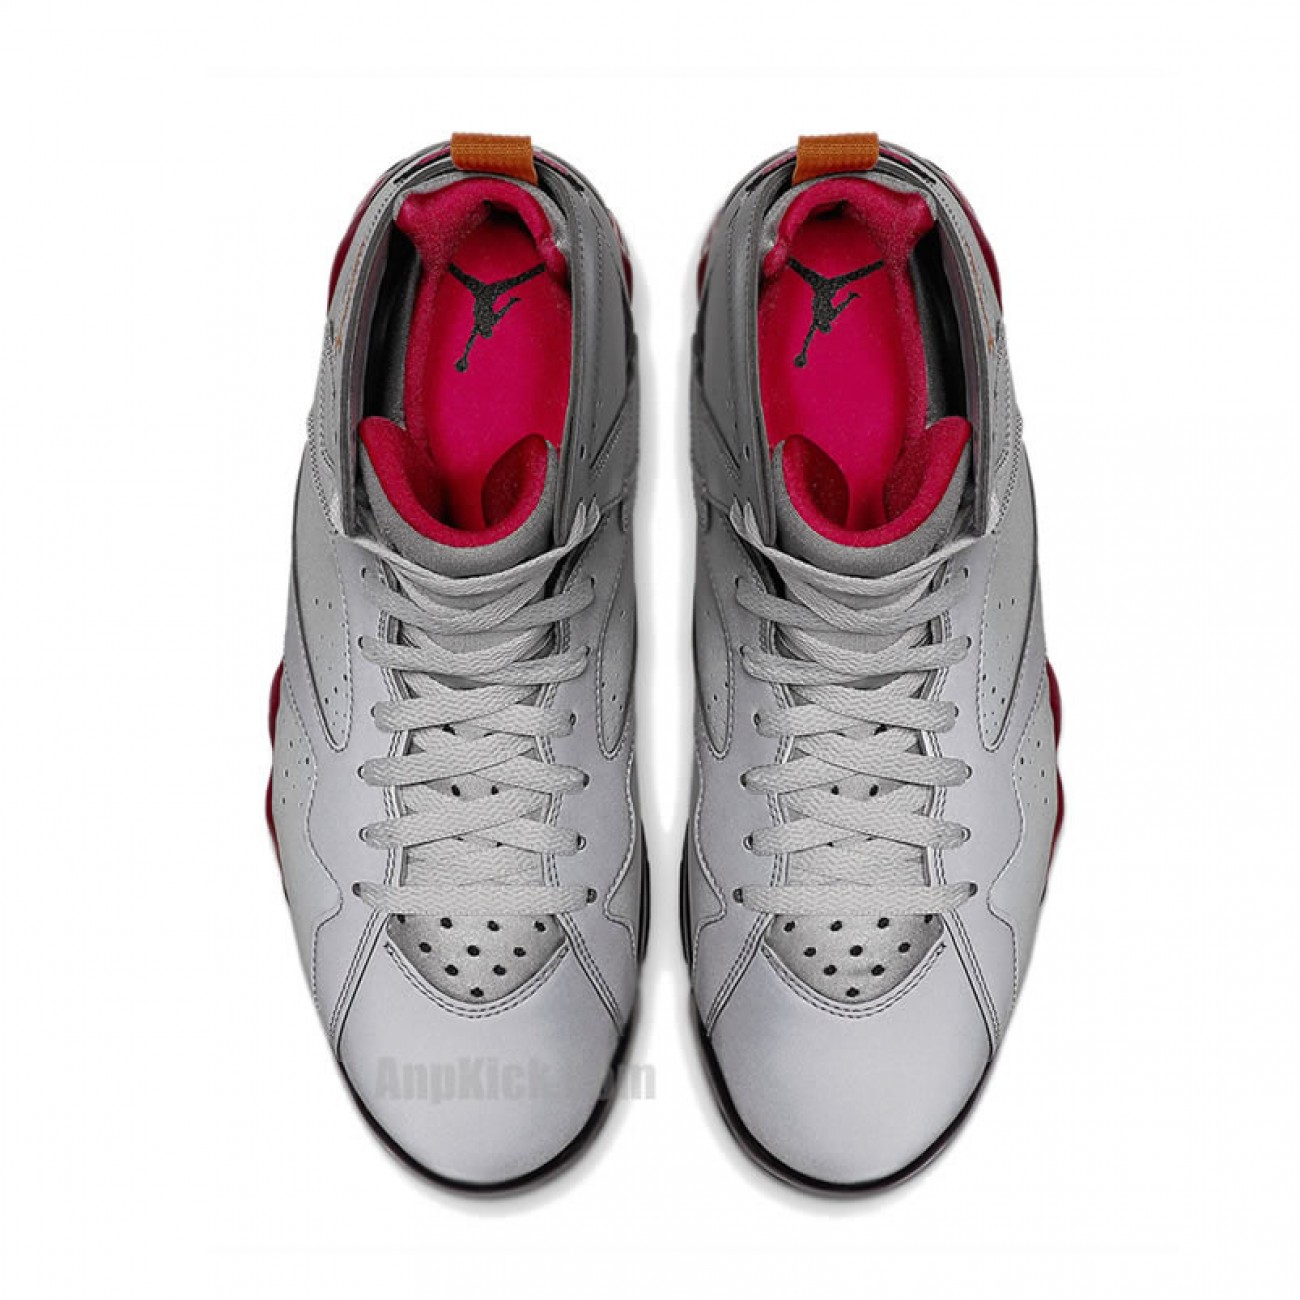 Air Jordan 7 3M Reflections Silver Of A Champion Release Date BV6281-006